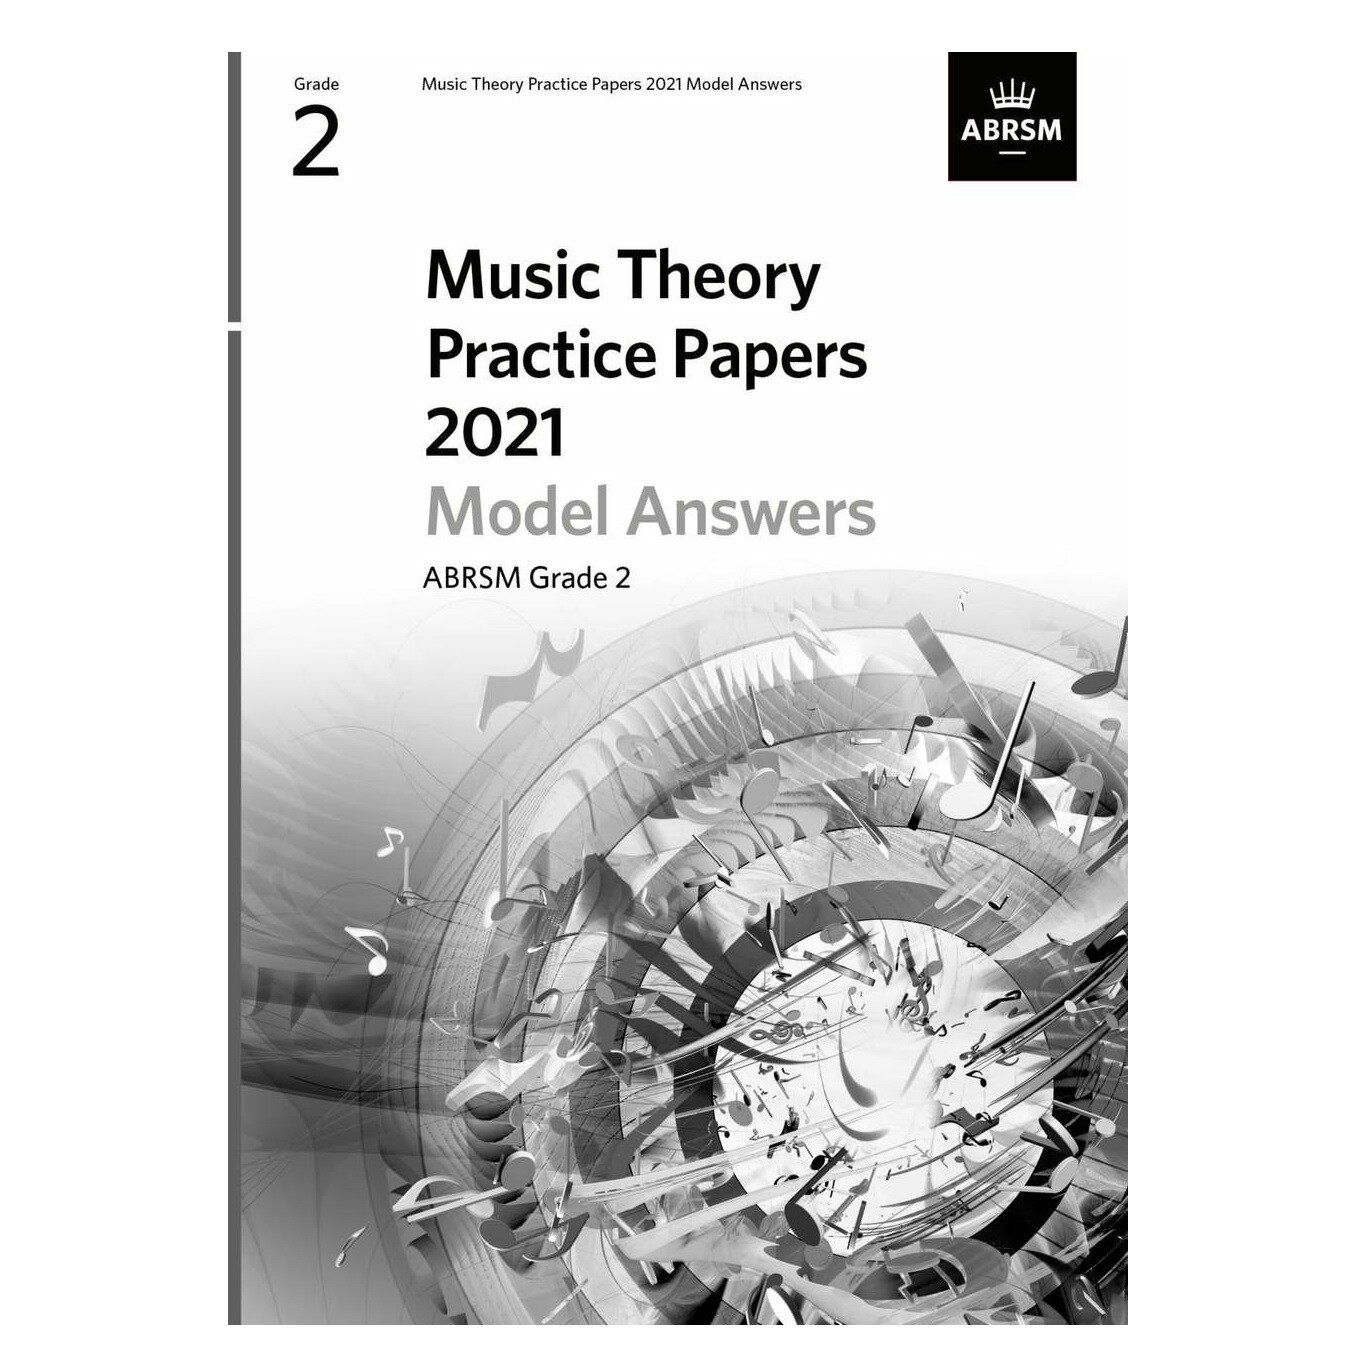 ABRSM Music Theory Practice Papers 2021 Model Answers: Grade 2